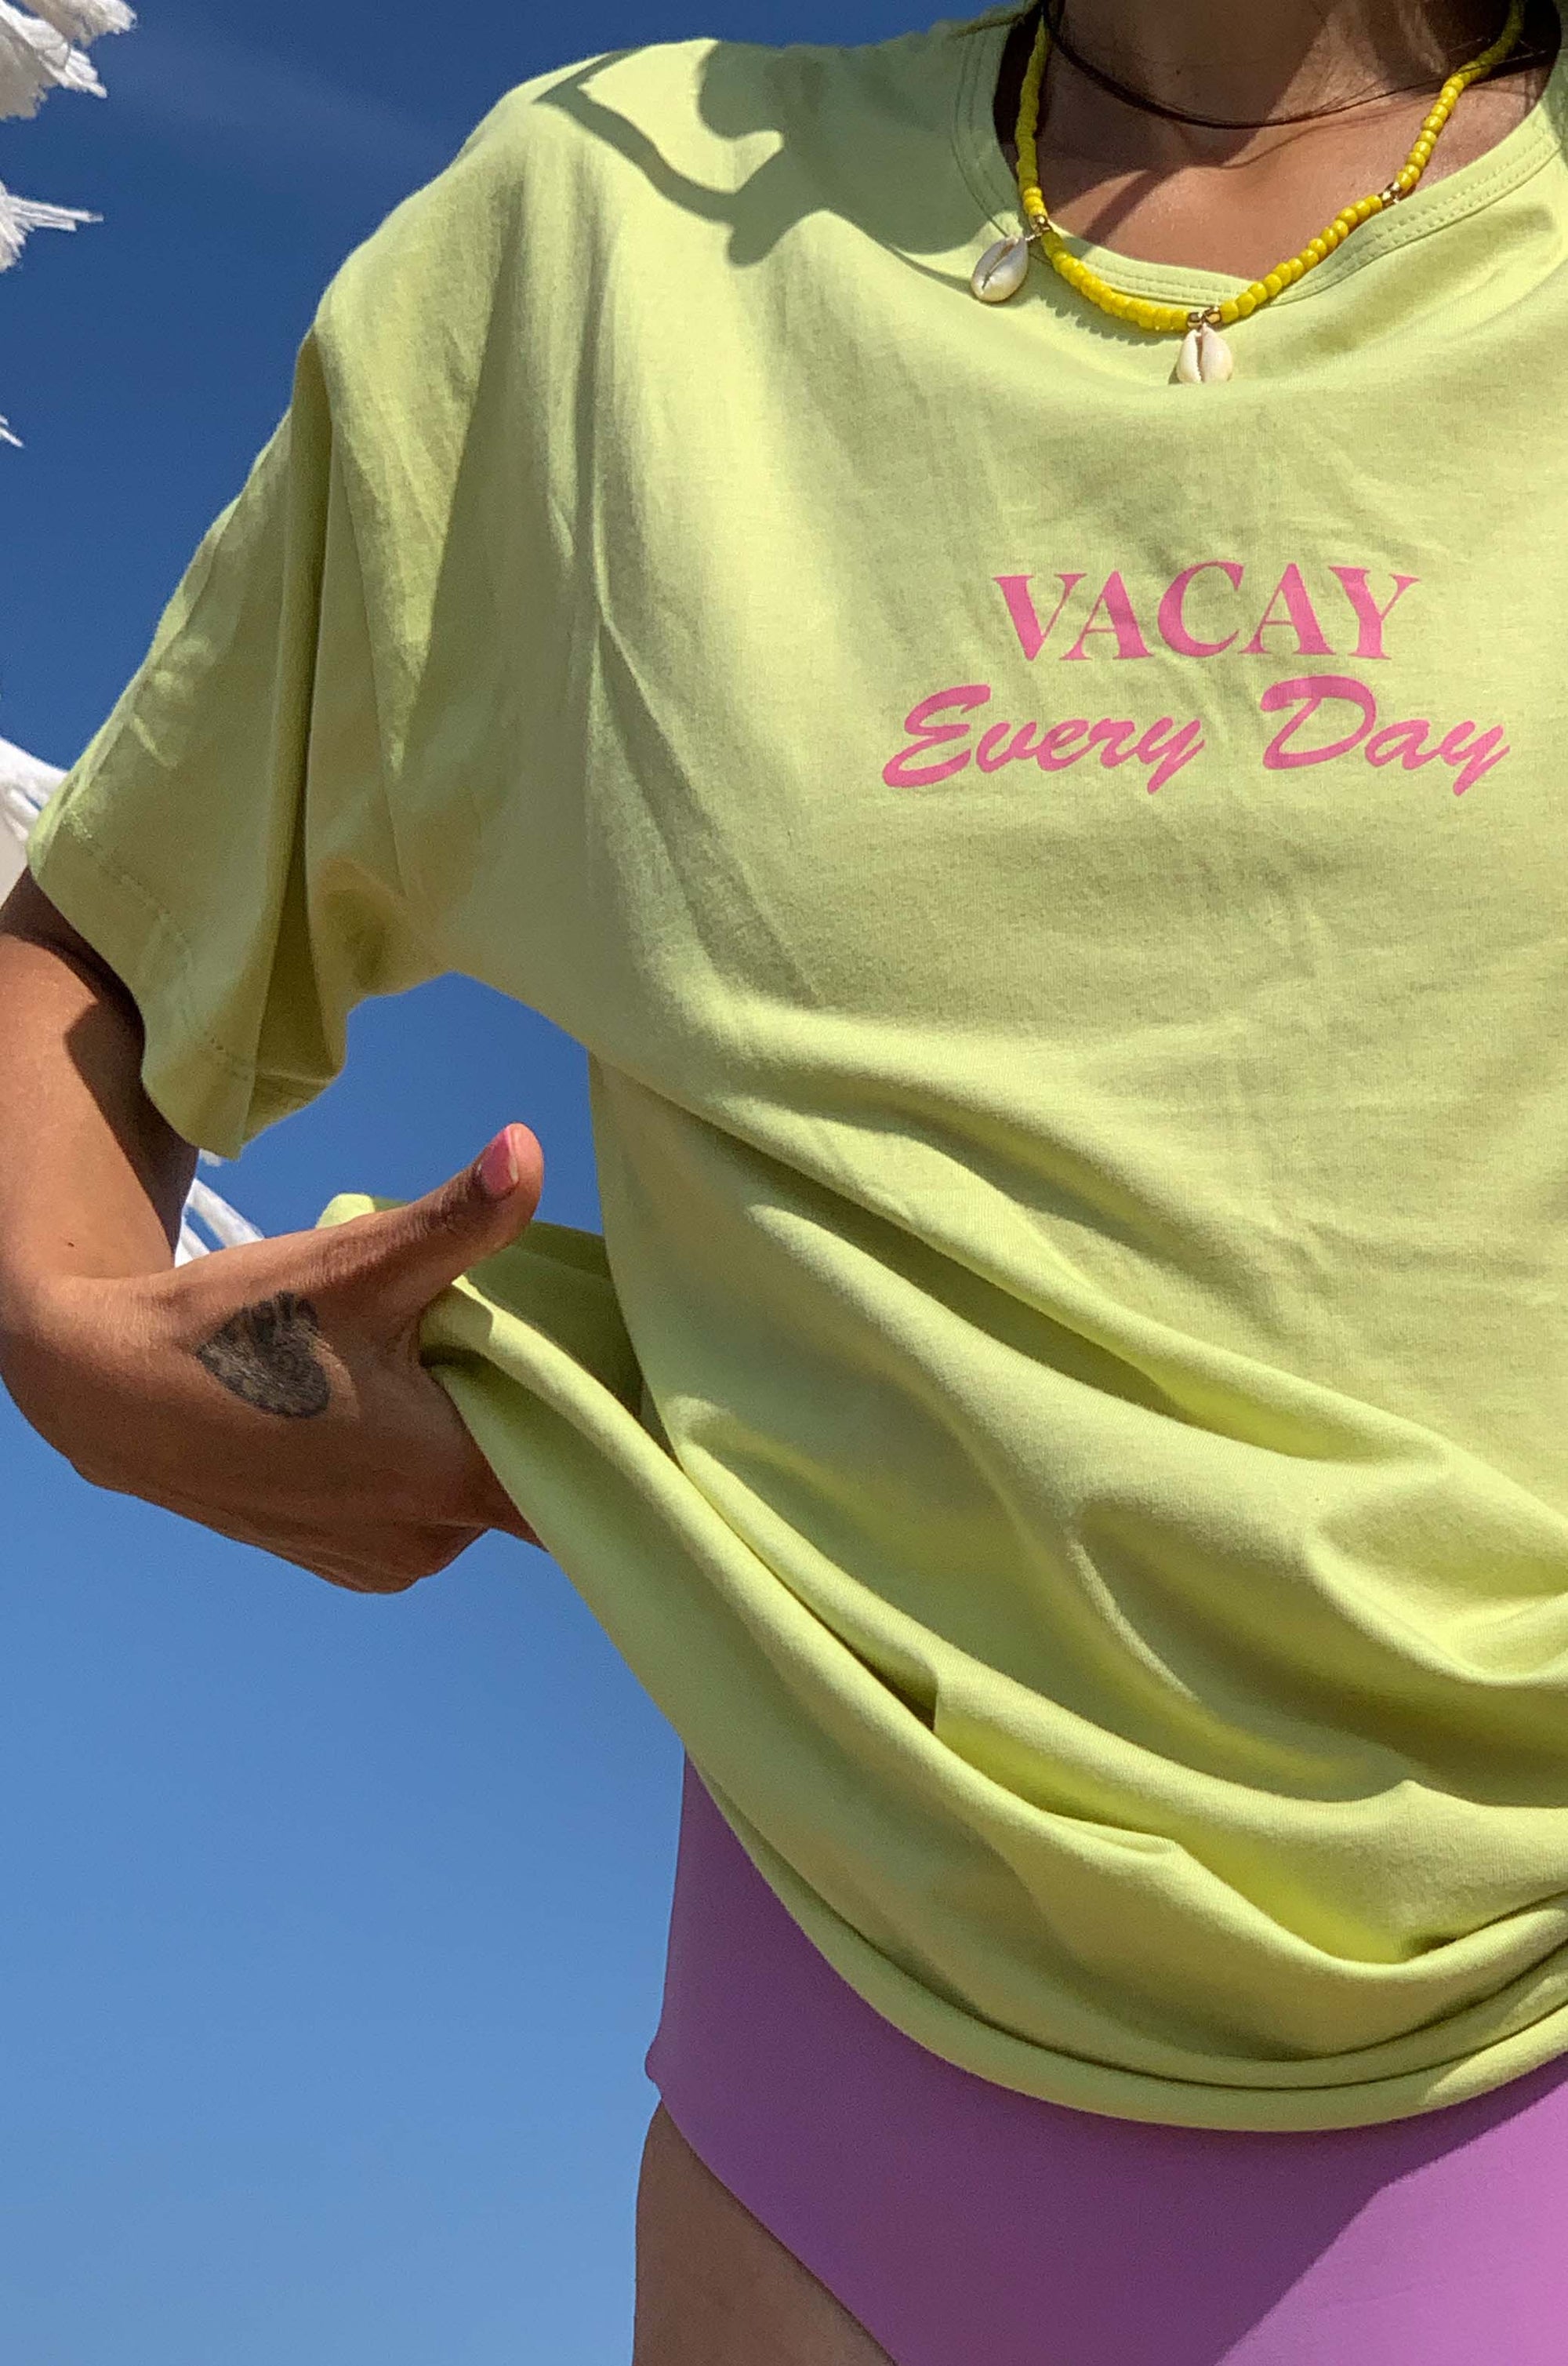 Vacay Every Day T-shirt